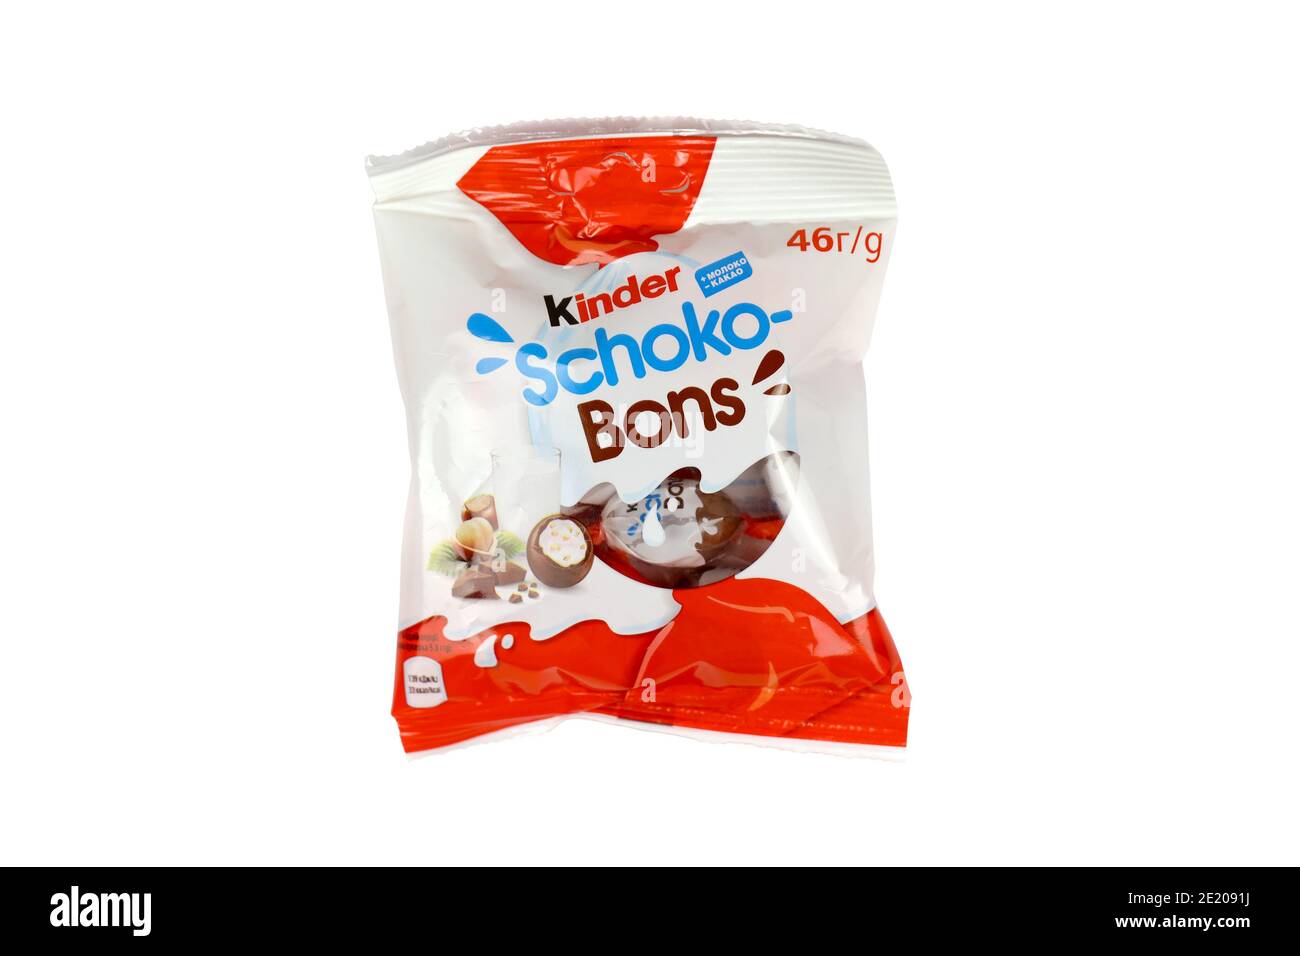 Schoko-bons Chocolate Package Made by Kinder Editorial Photography - Image  of package, white: 181485932